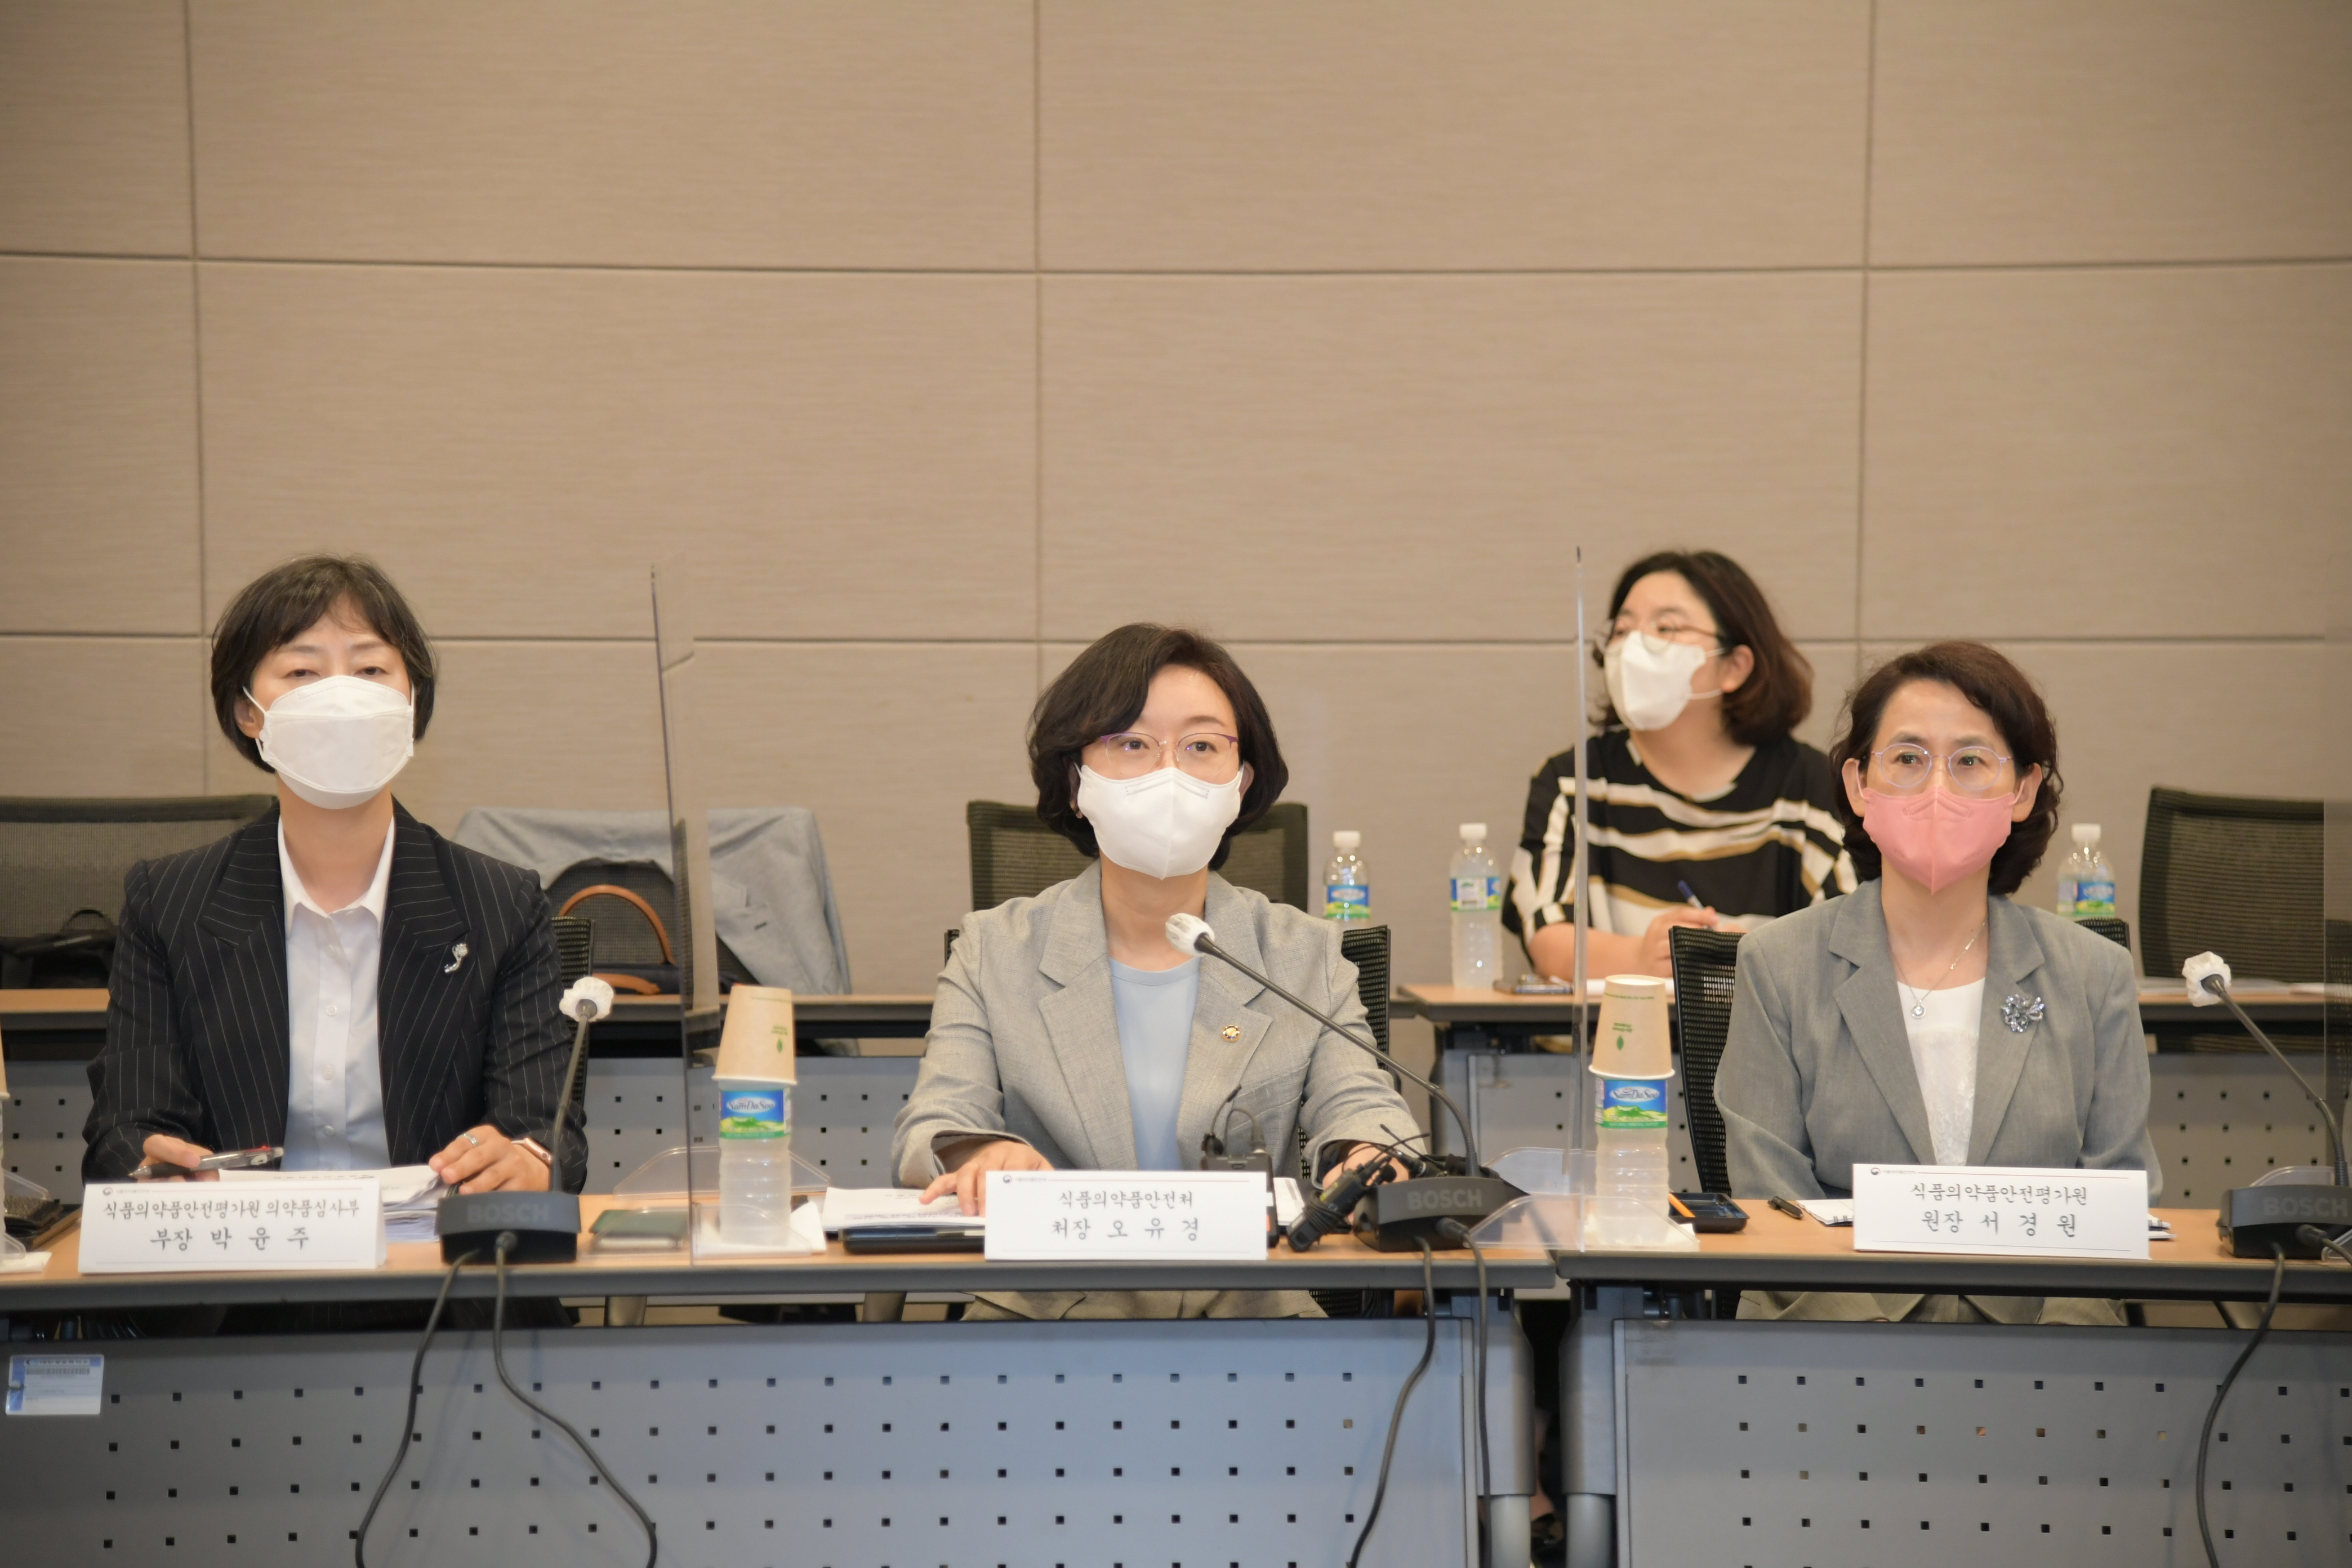 Photo News2 - [July 29, 2022] Minister Attends the Industry Meeting to Support Development of COVID-19 Vaccines and Therapeutics